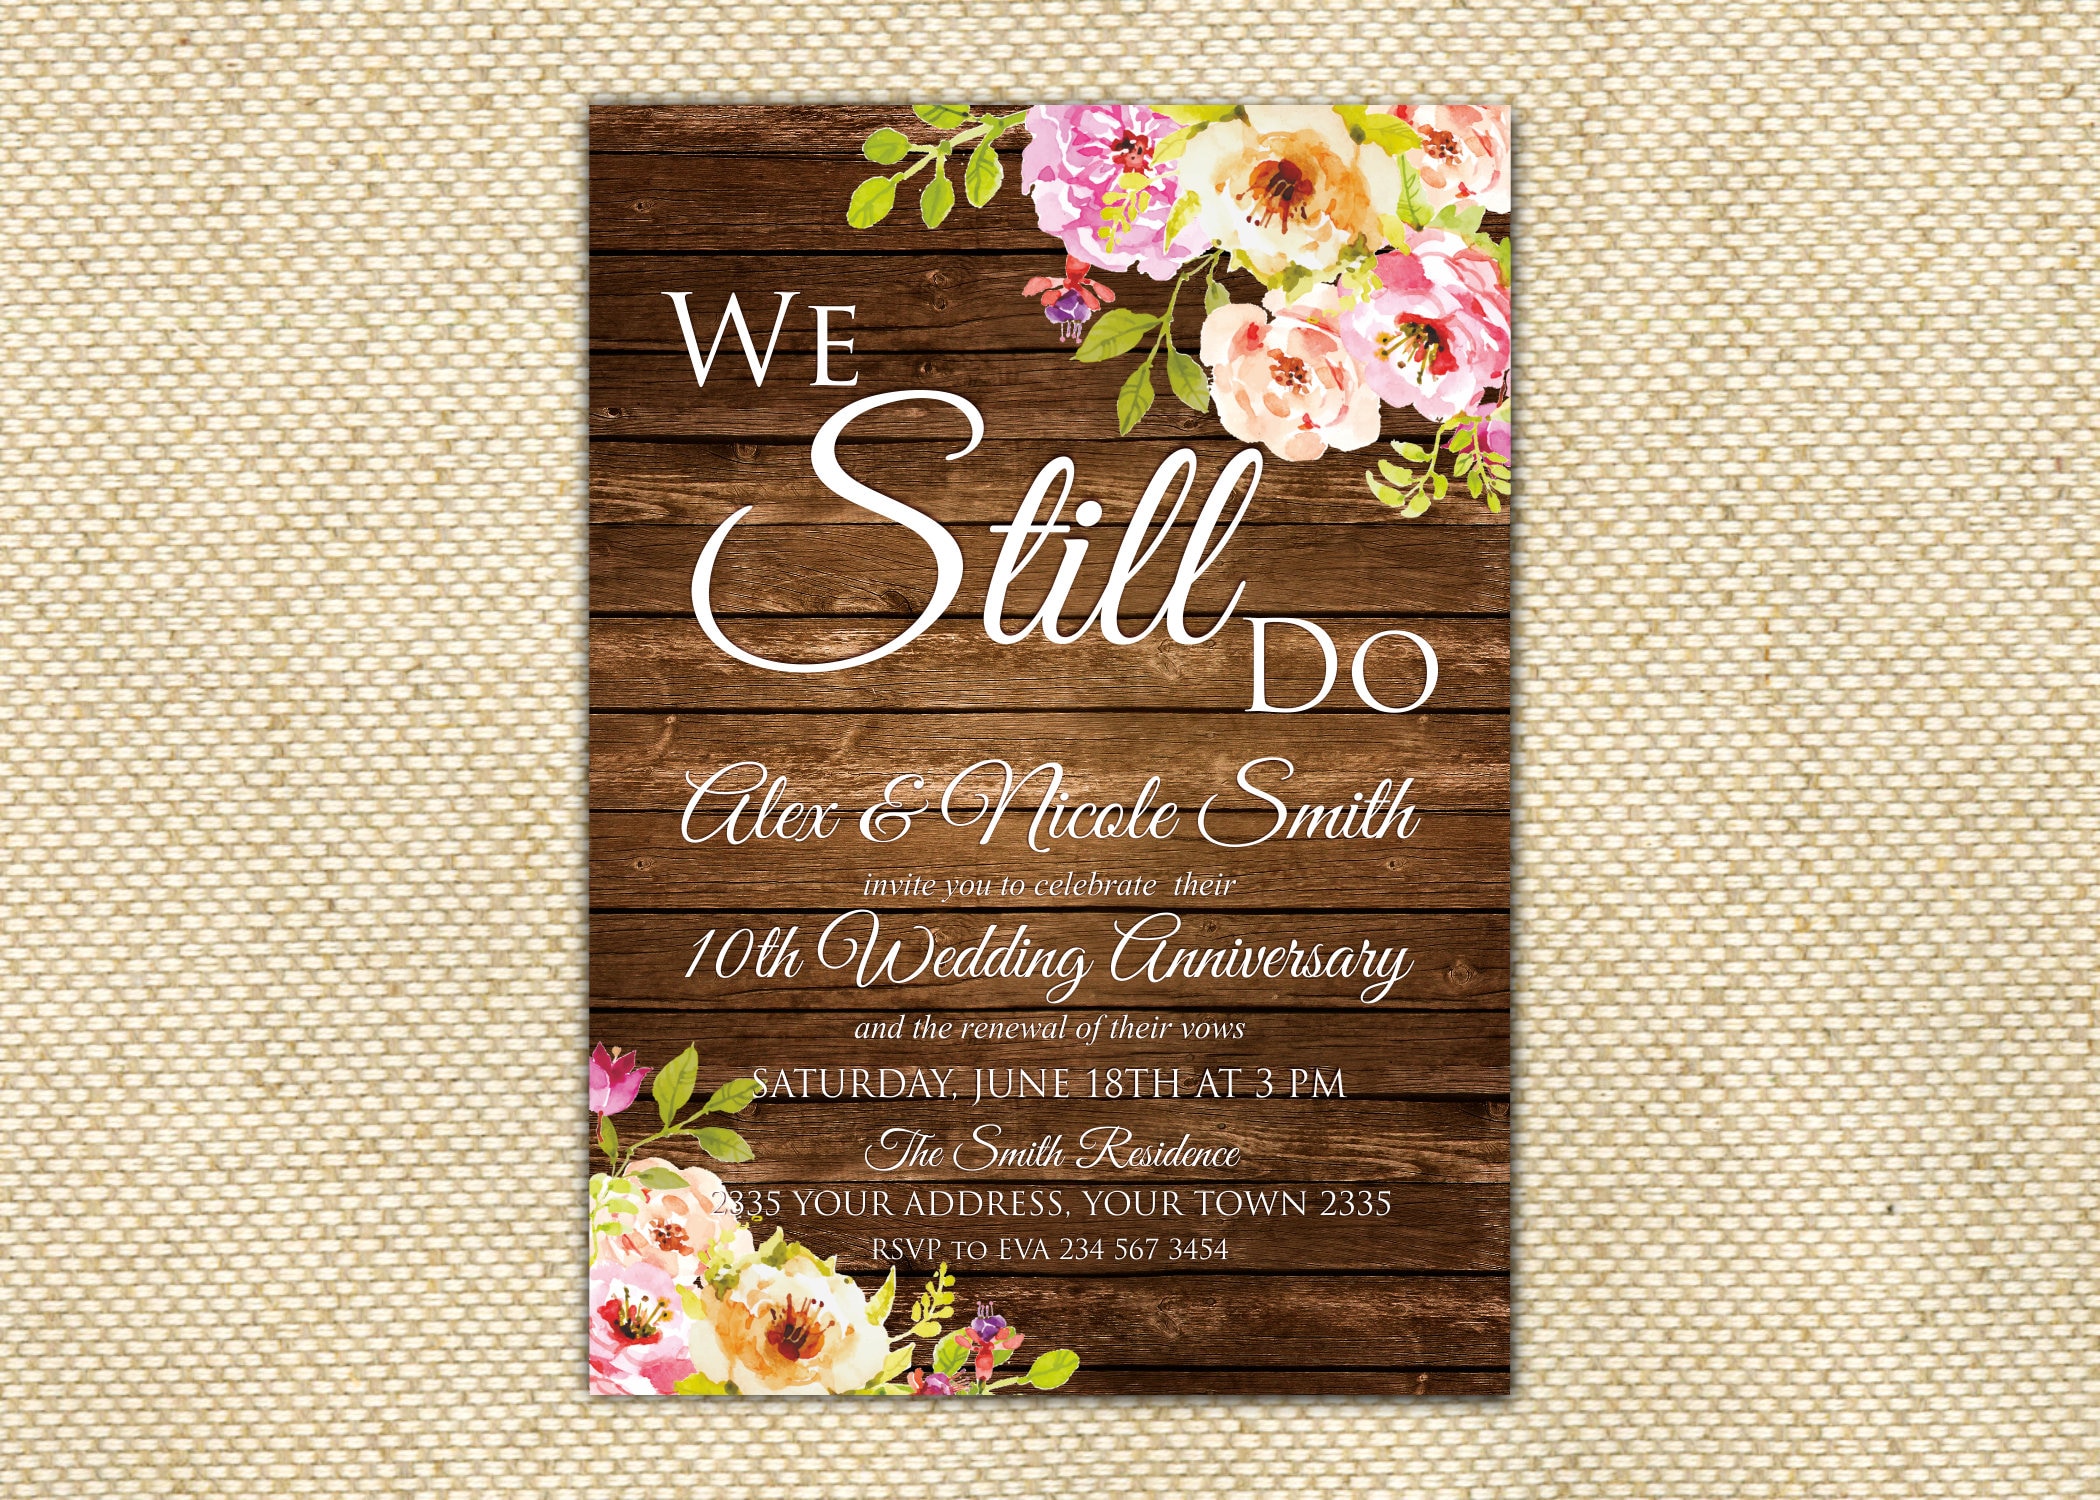 Invitations For Vow Renewal